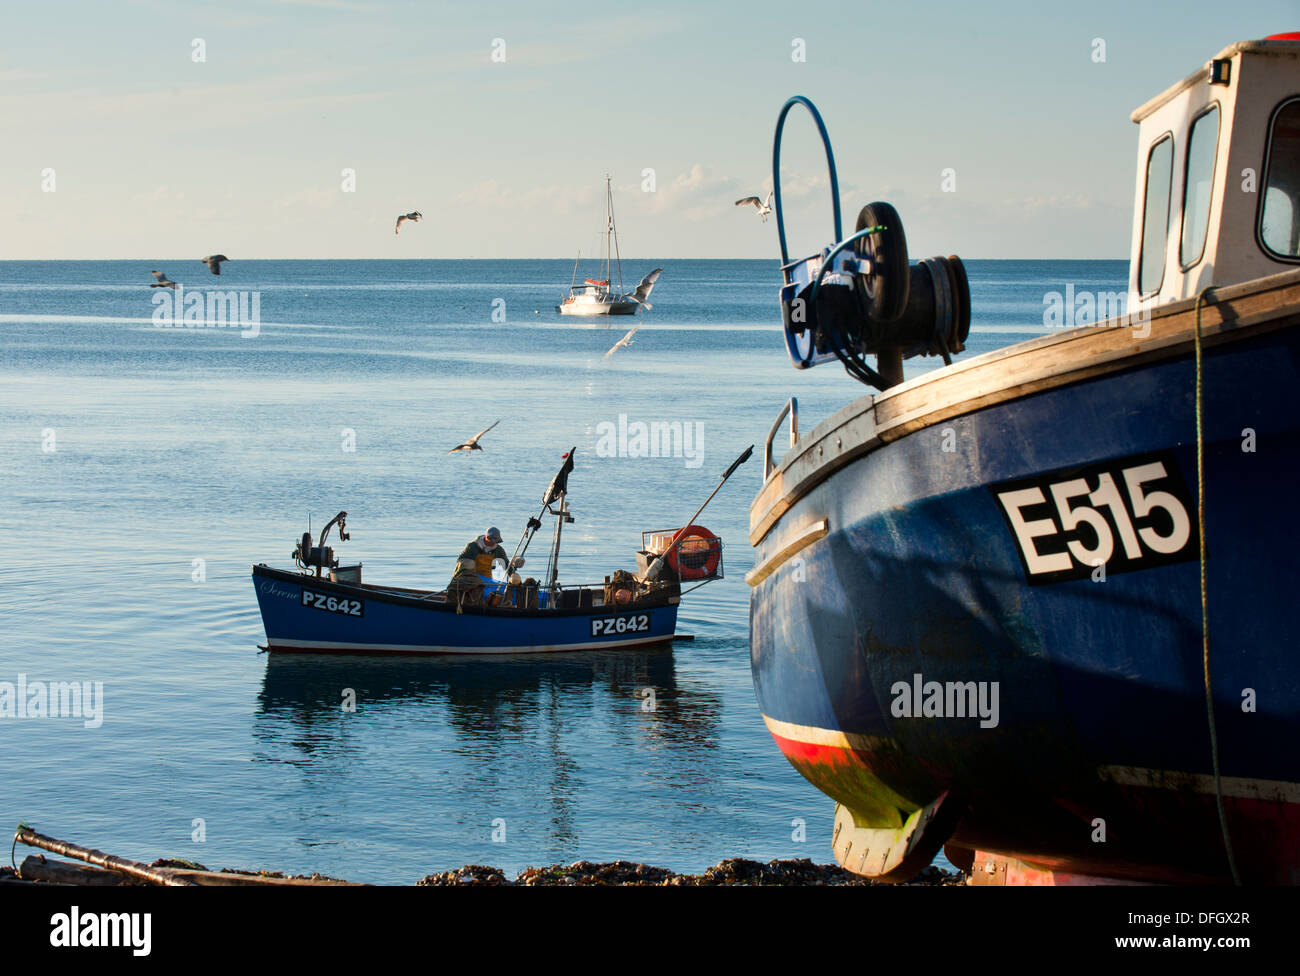 Boat on fishing trip at Beer Devon England Stock Photo